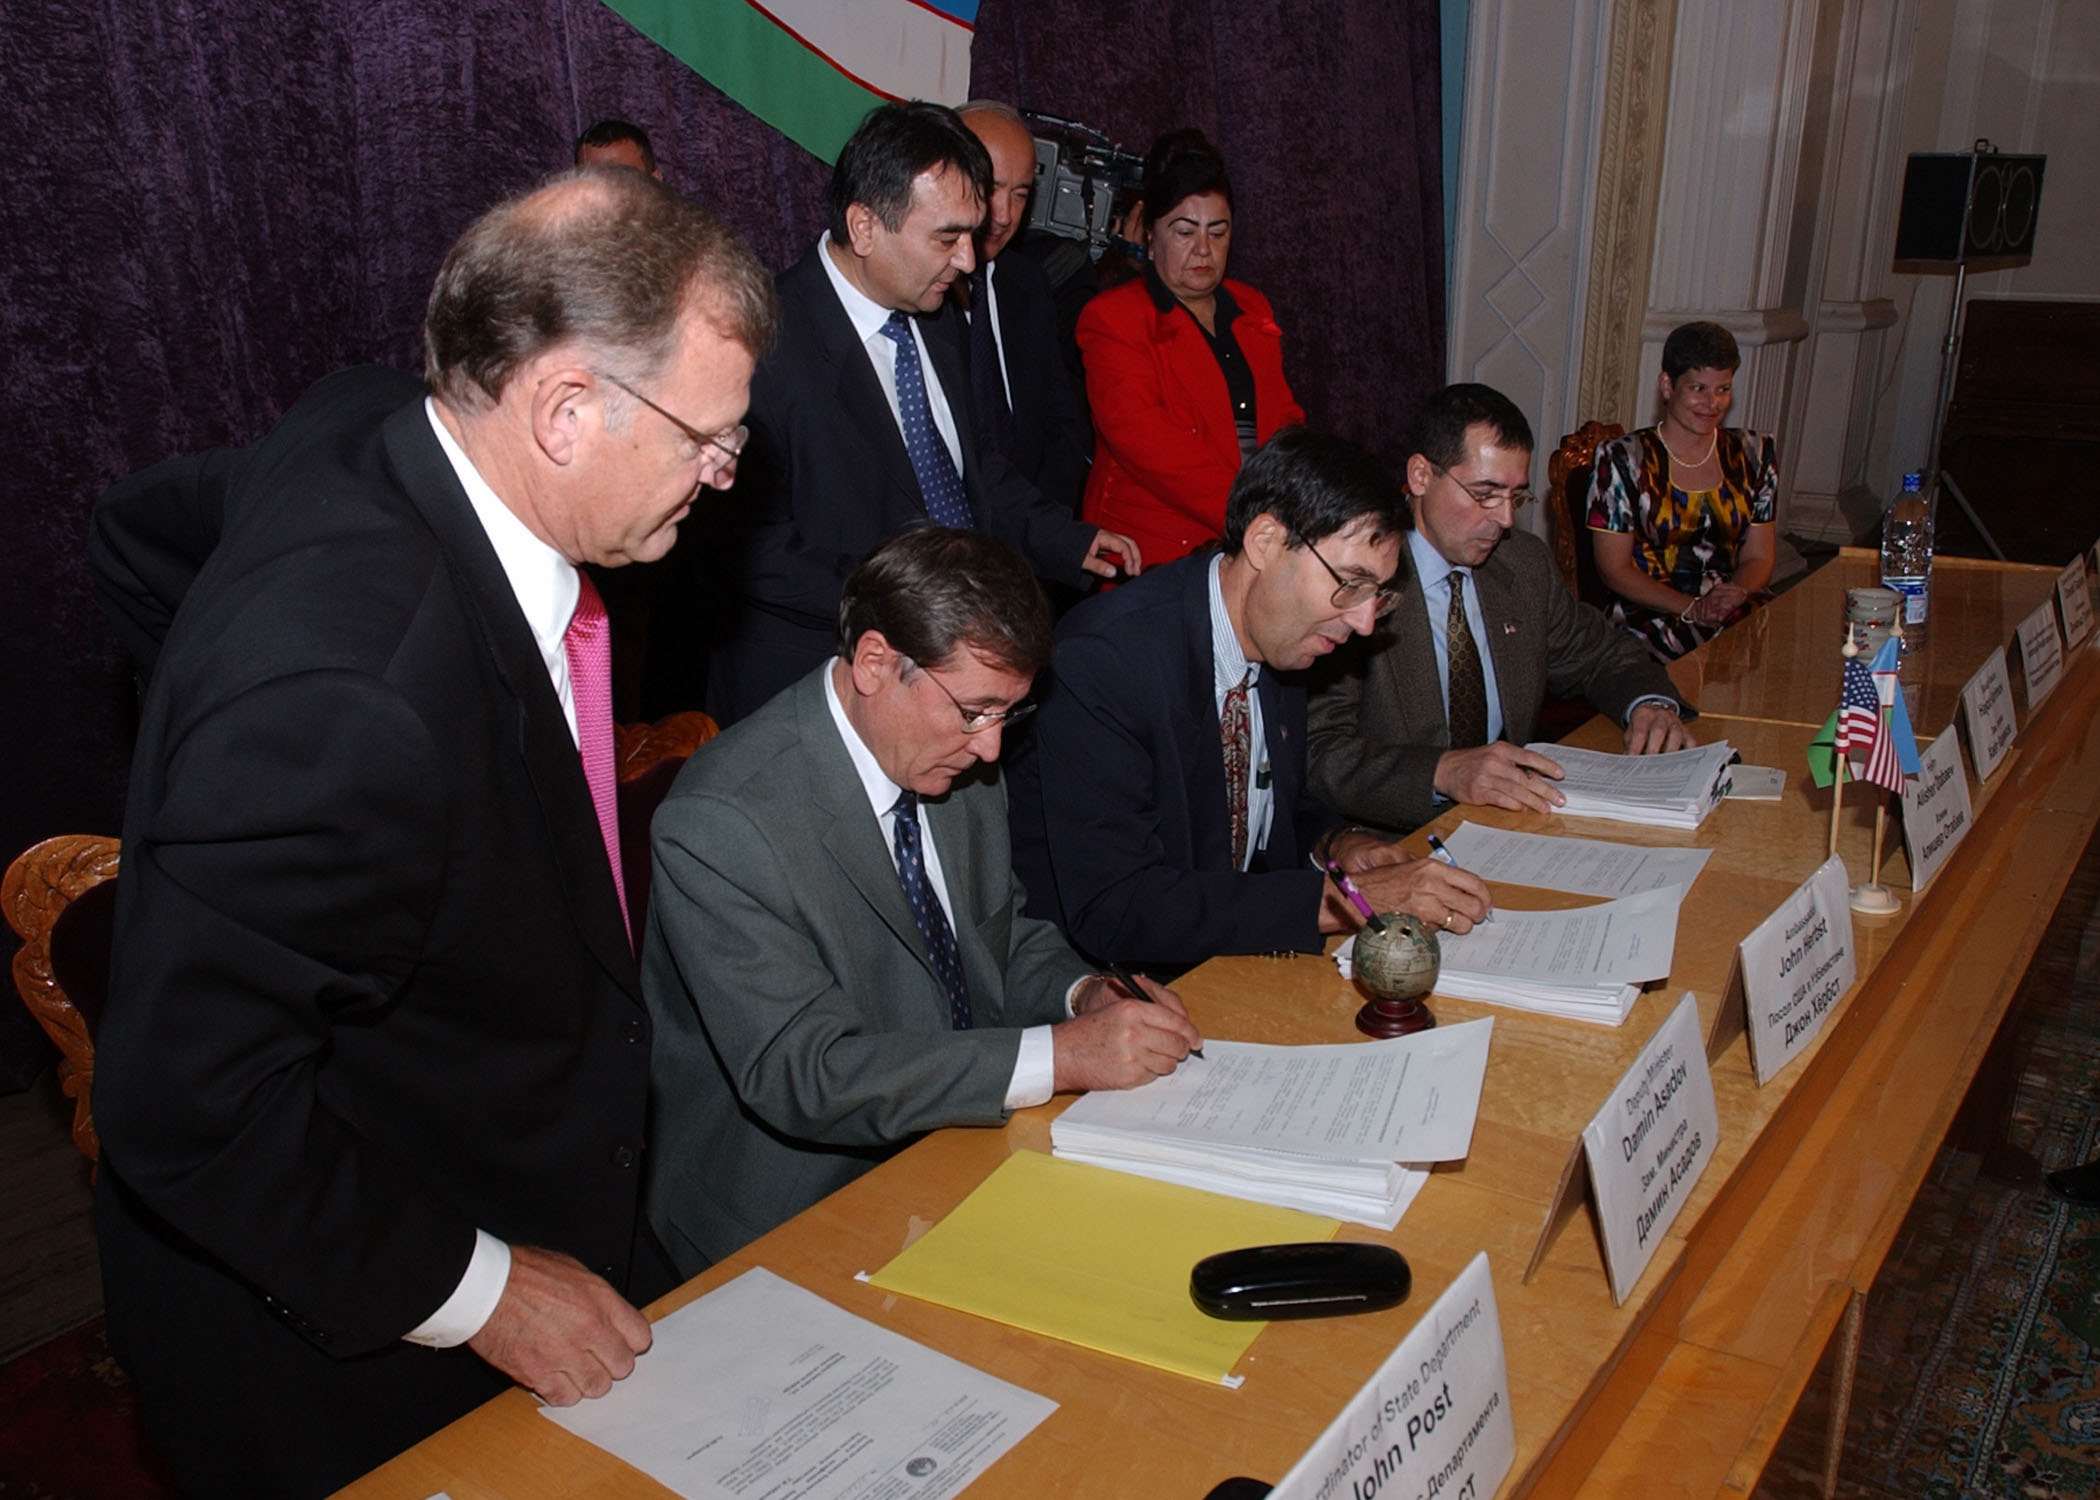 US Navy 021024-N-5329L-001 John Herbst, U.S. Ambassador to Uzbekistan, and Hakim Alisher A. Atabaev, Mayor of the Fergana region, sign the official turnover documents between the republic of Uzbekistan and the United States